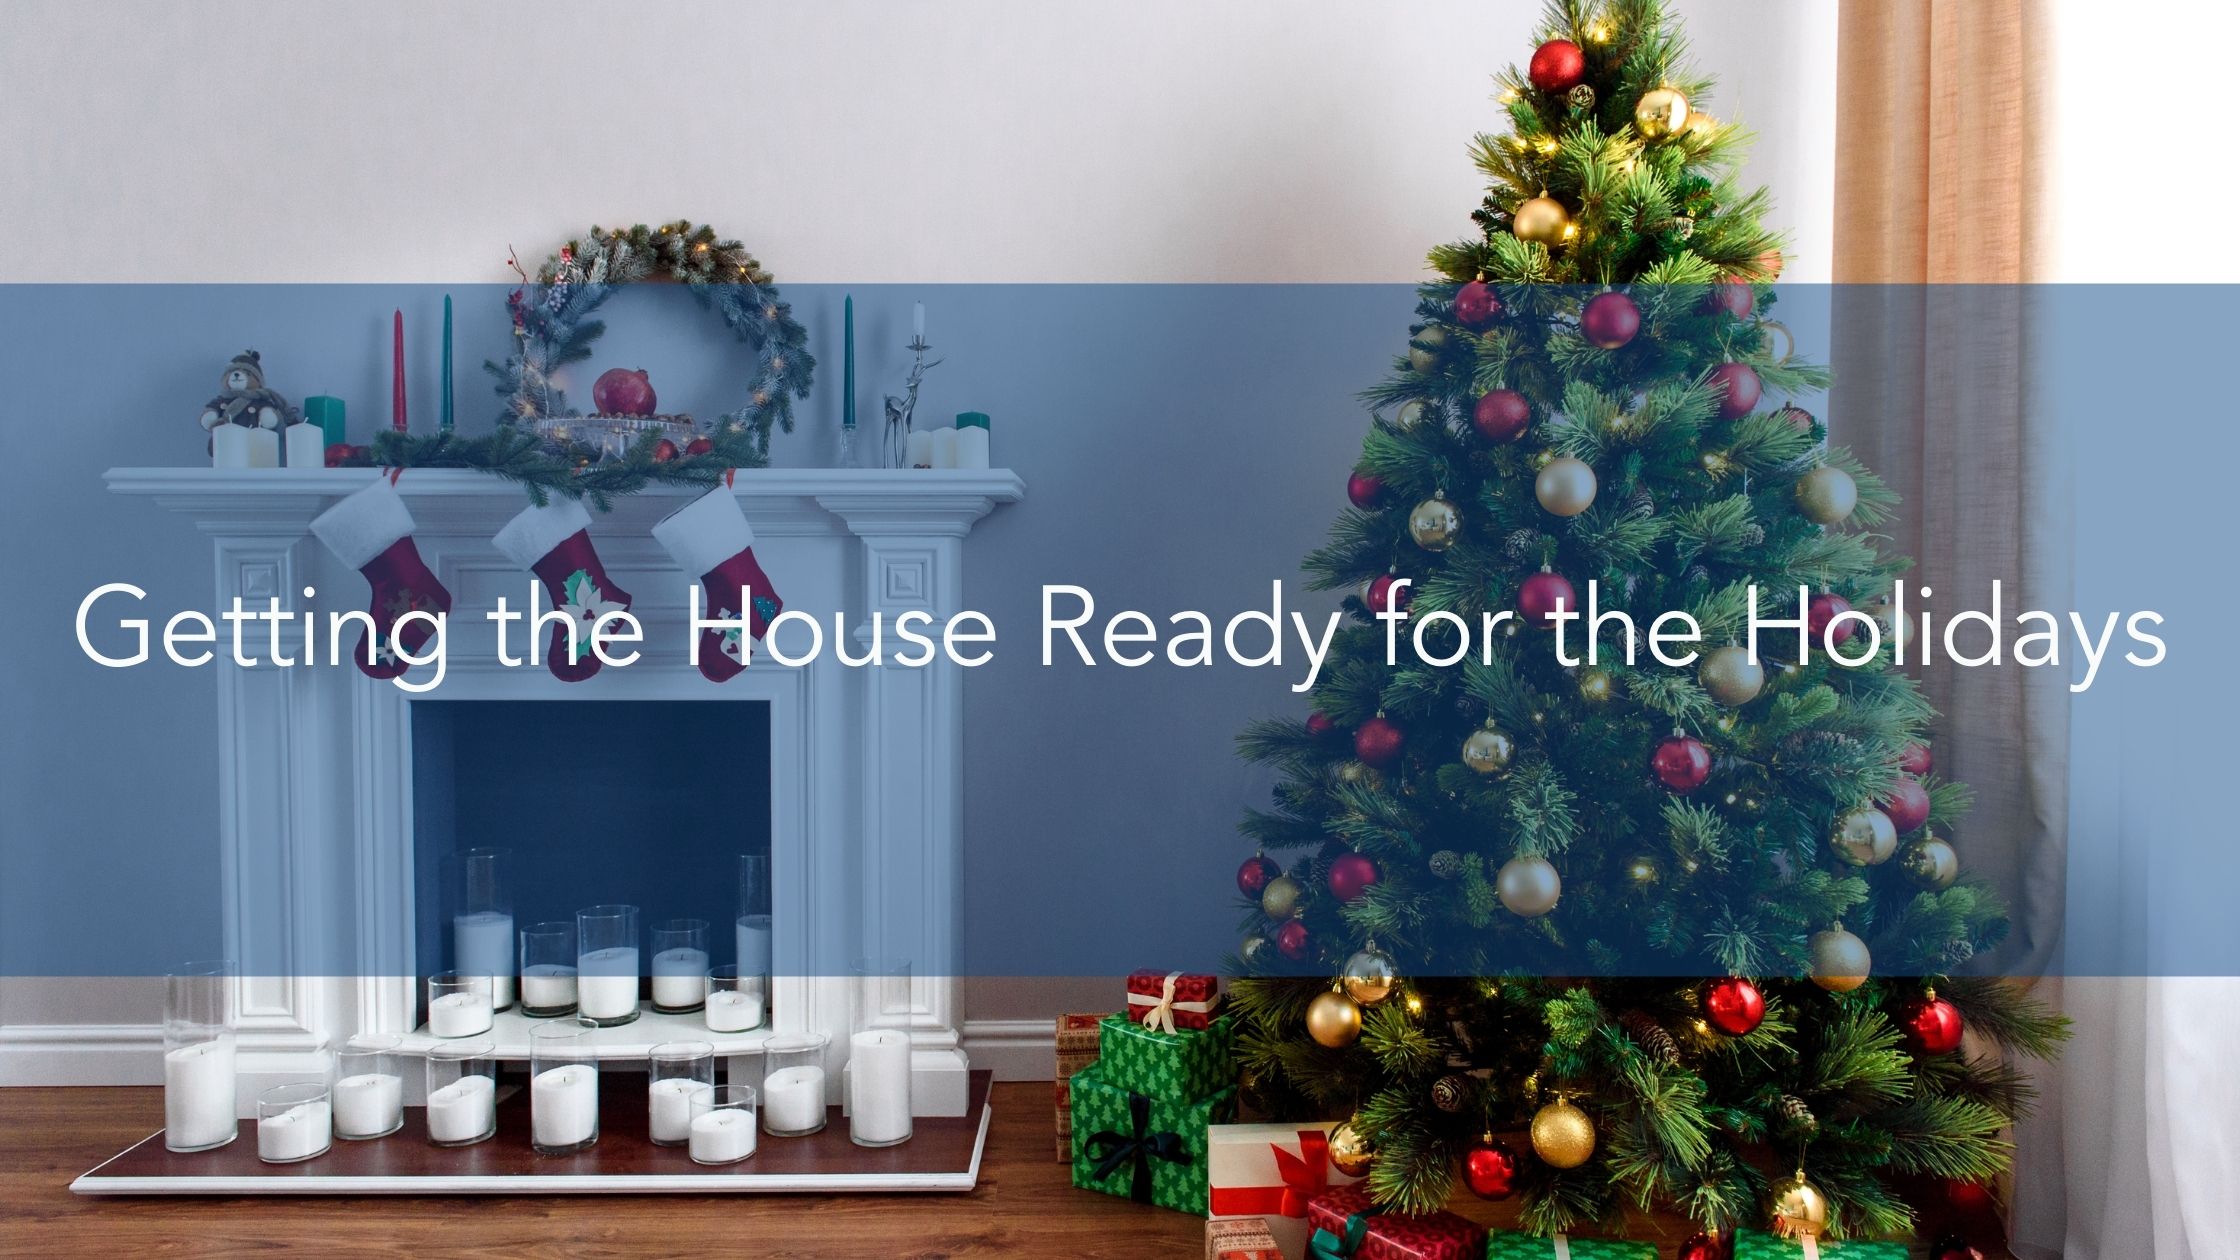 https://雷竞技下载链接官网appwww.explorizers.com/wp-content/uploads/2021/11/Getting-the-House-Ready-for-the-Holidays.jpg